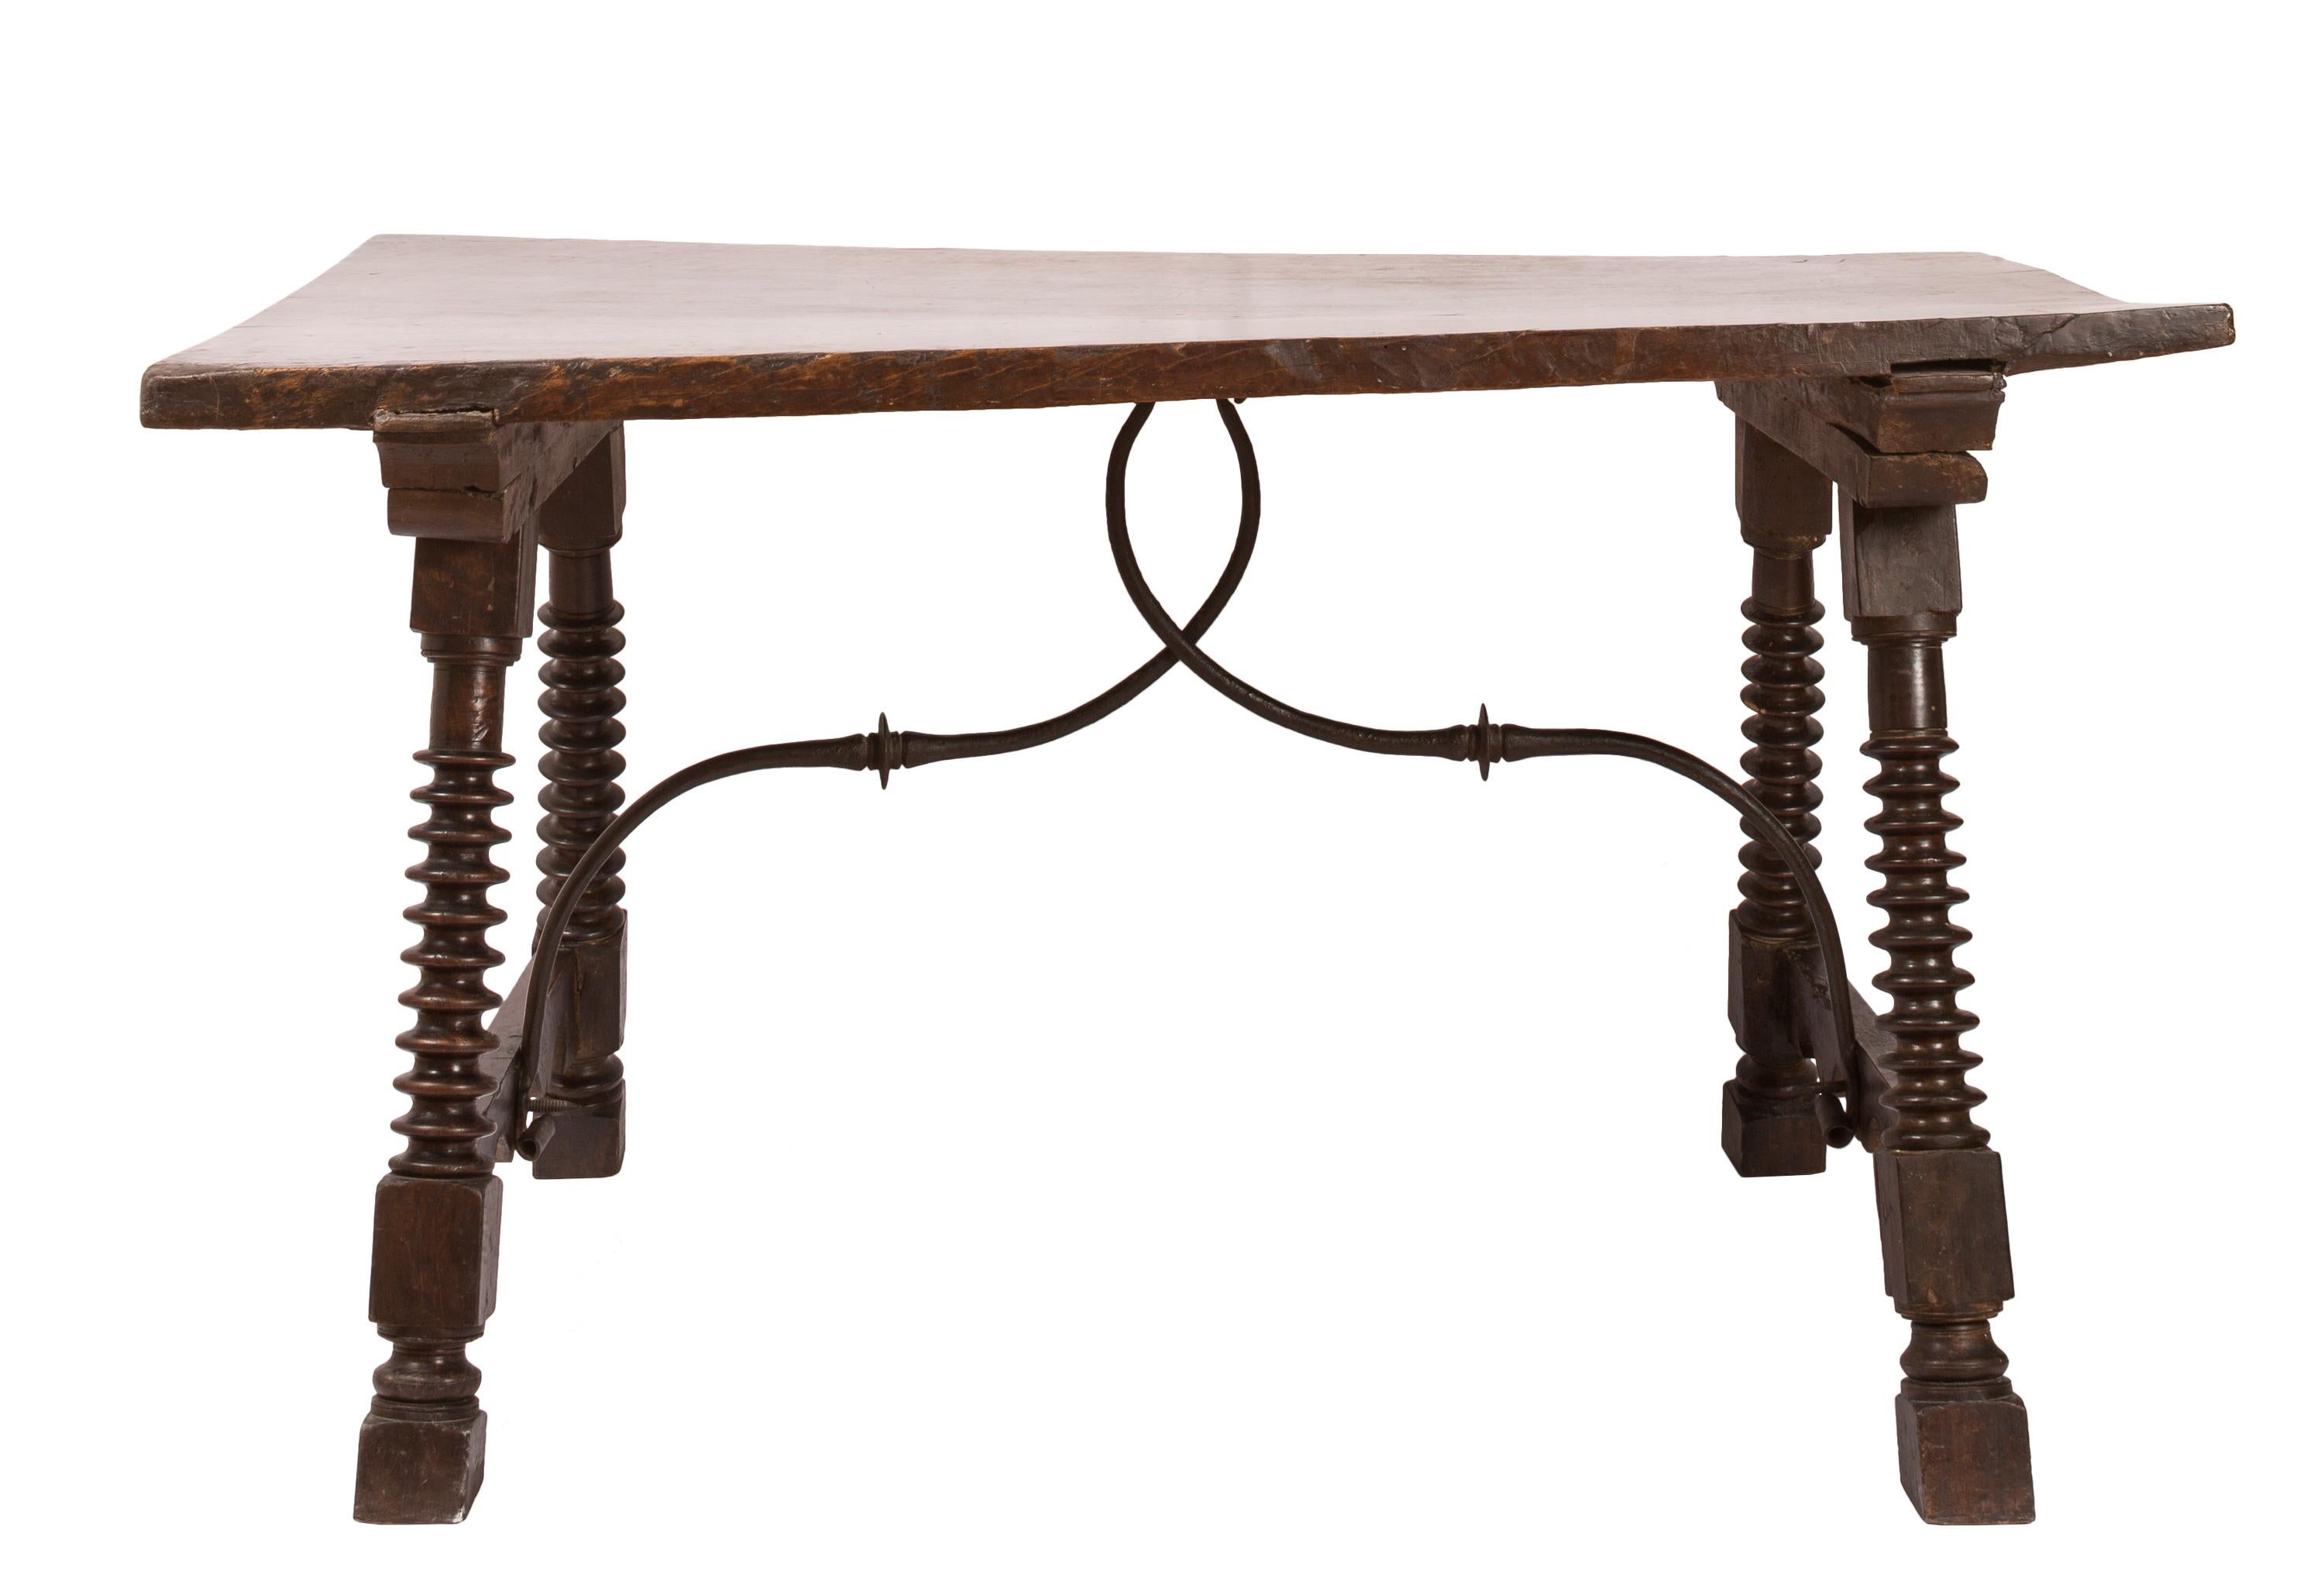 The tabletop of this 18th century Spanish table is one single wide plank, which over the years has warped slightly, adding an attractive twist to the surface and creating a piece of furniture with unique character. The deeply-coved spool turned leg